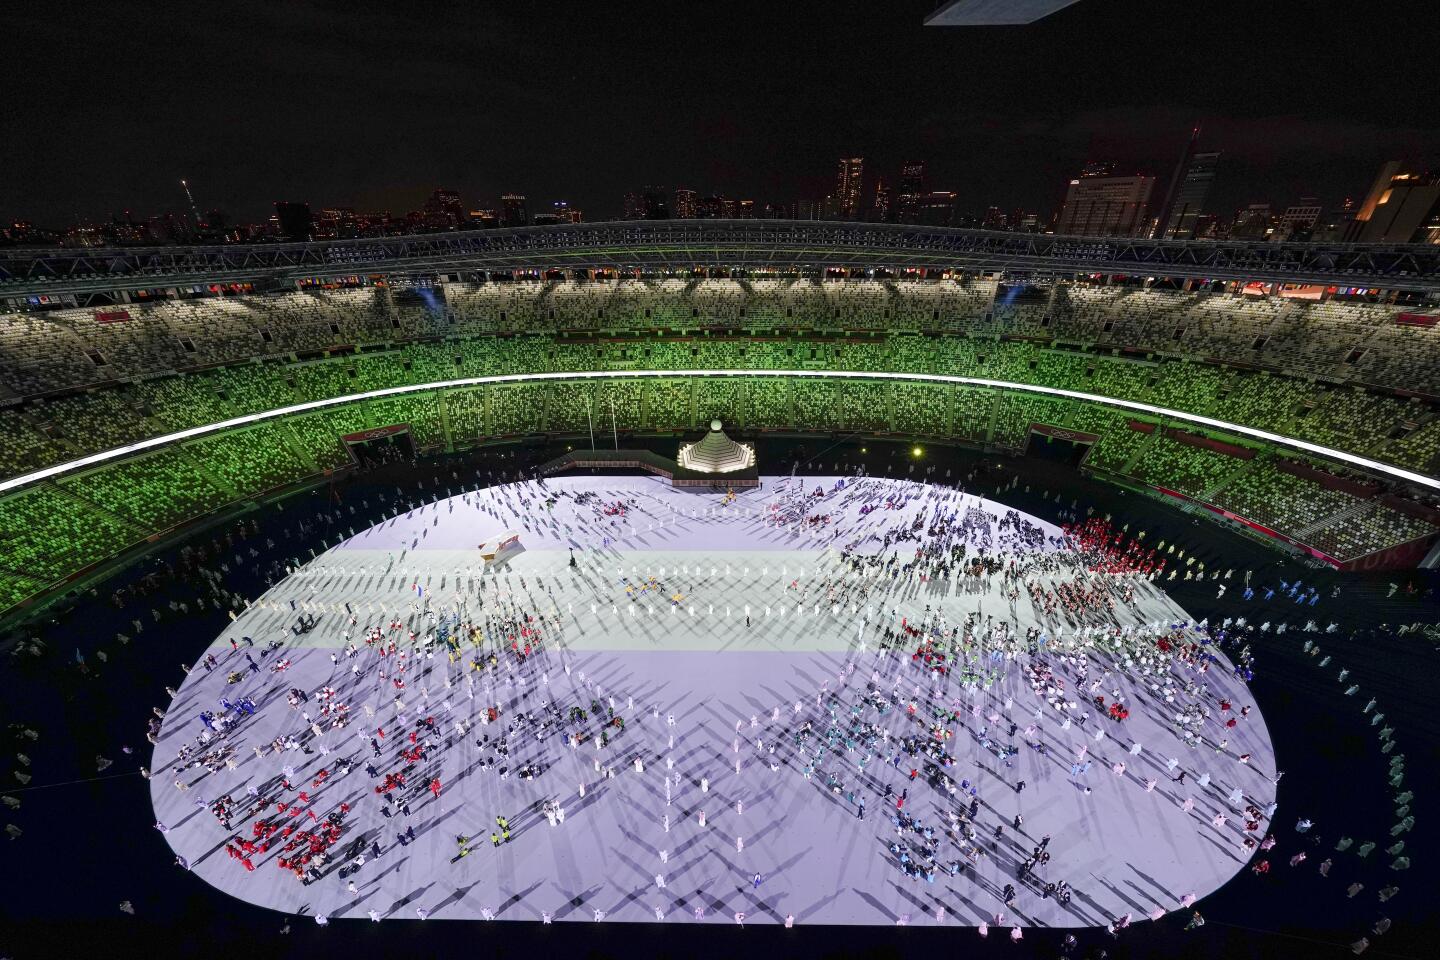 Athletes are introduced during the opening ceremony at the Olympic Stadium at the 2020 Summer Olympics, Friday, July 23, 2021, in Tokyo. (AP Photo/Morry Gash)